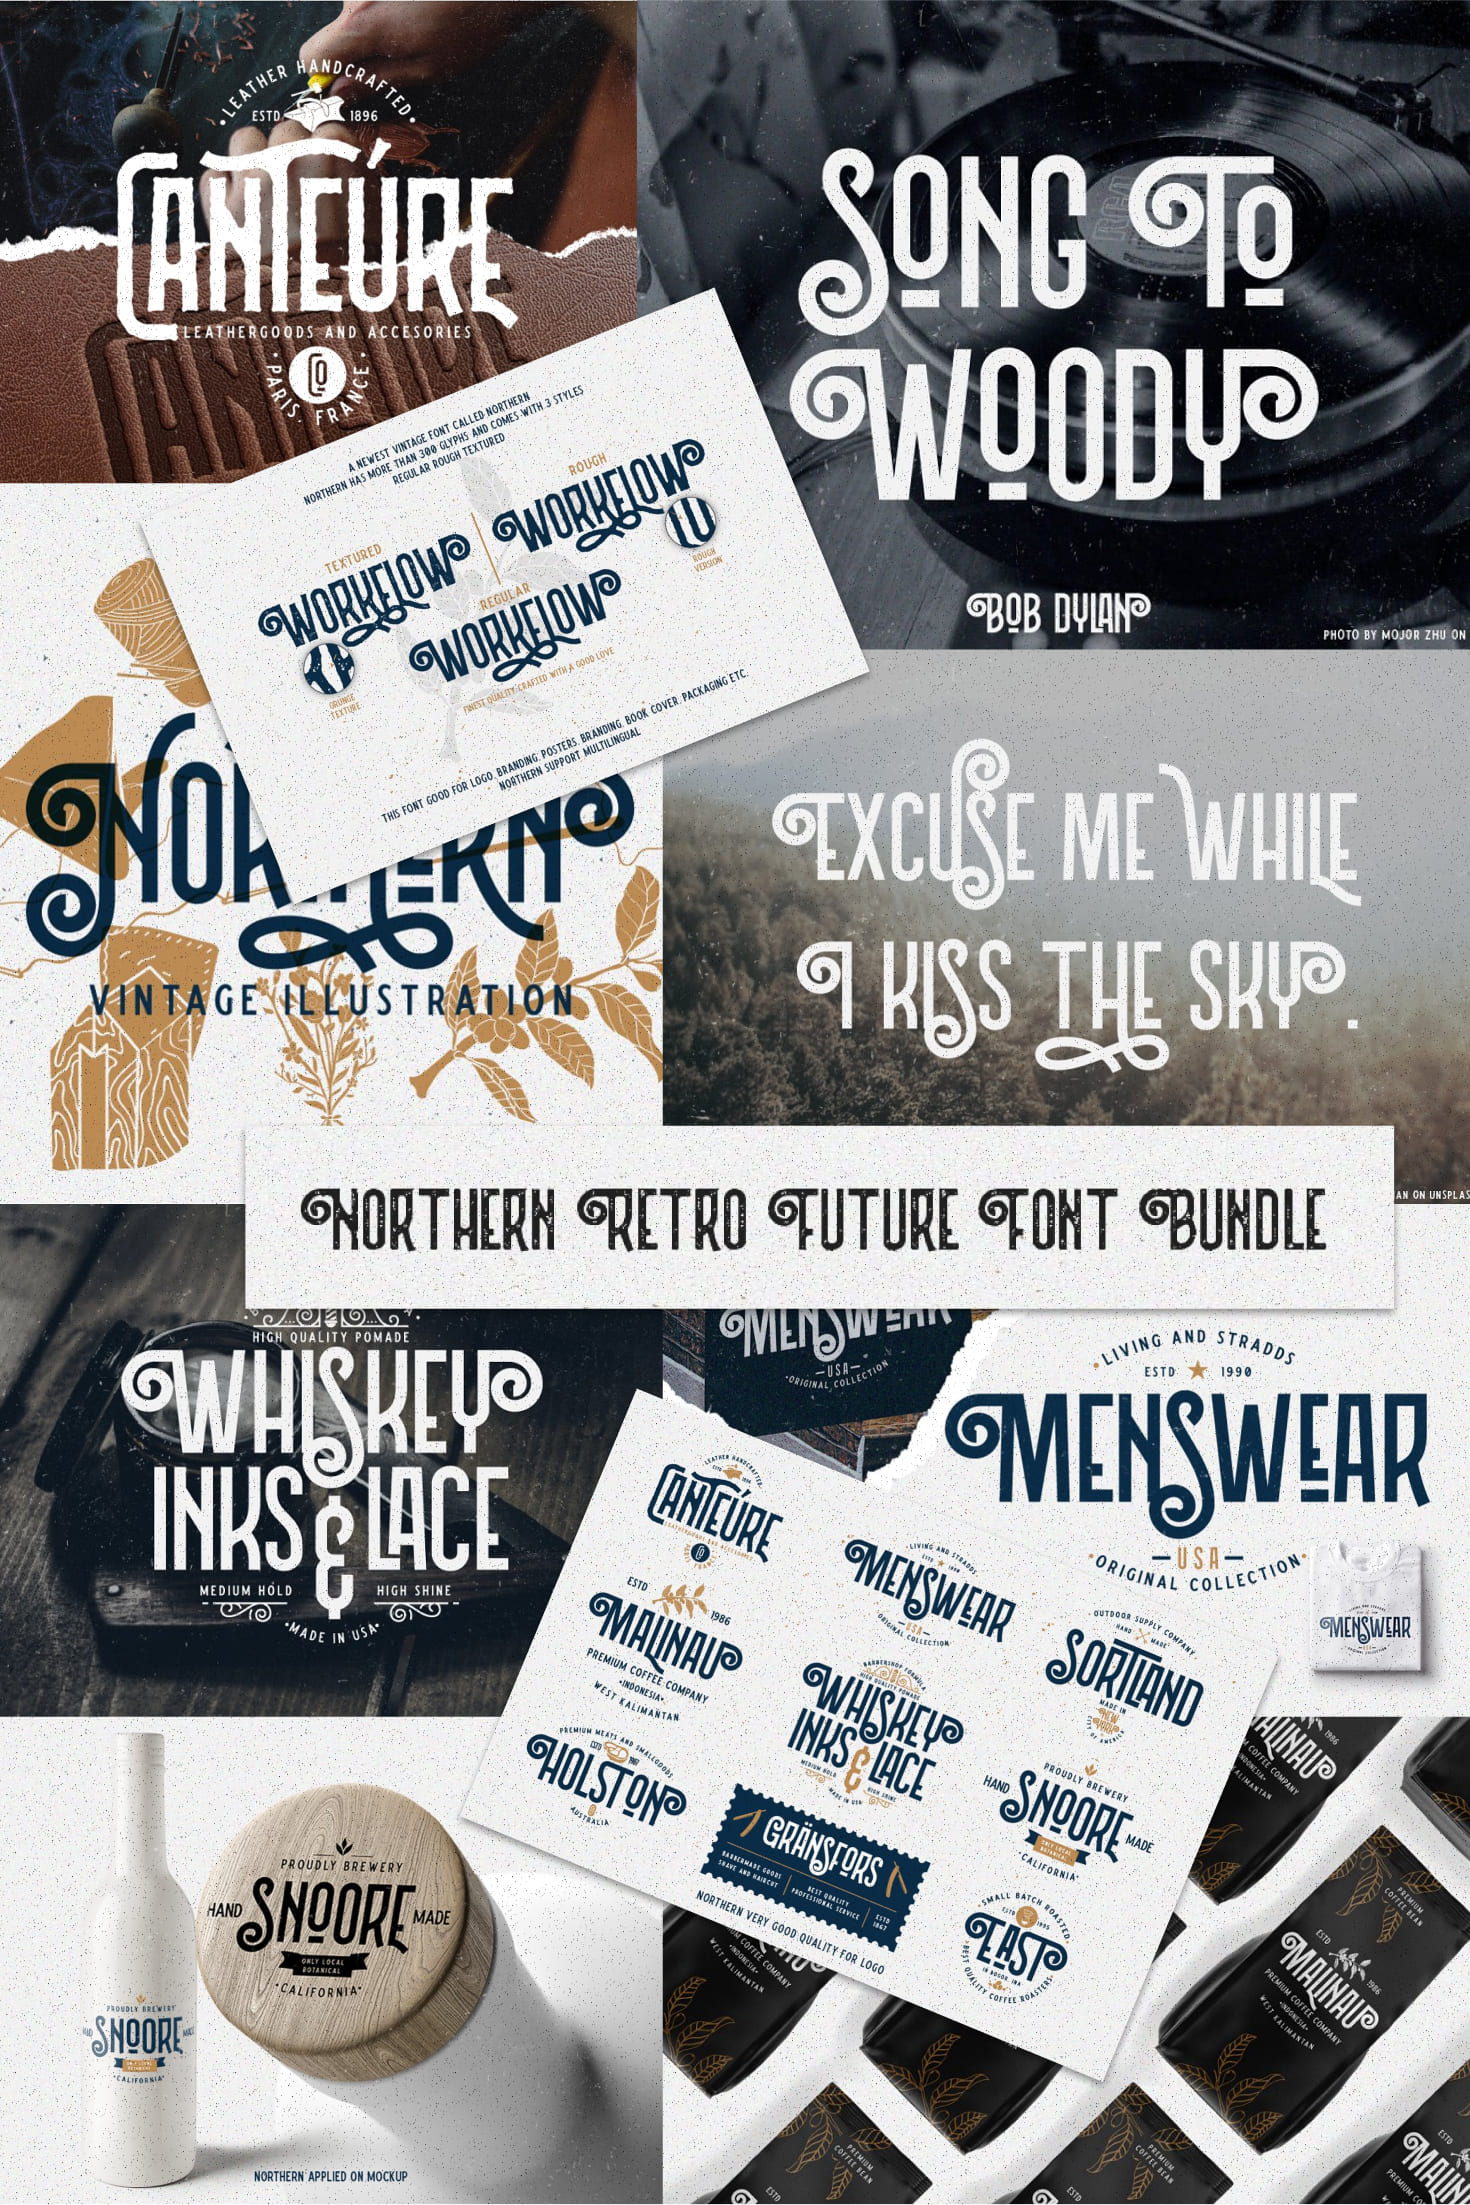 Pinterest Image: Northern Retro Future Font Bundle: 5 fonts with extras.